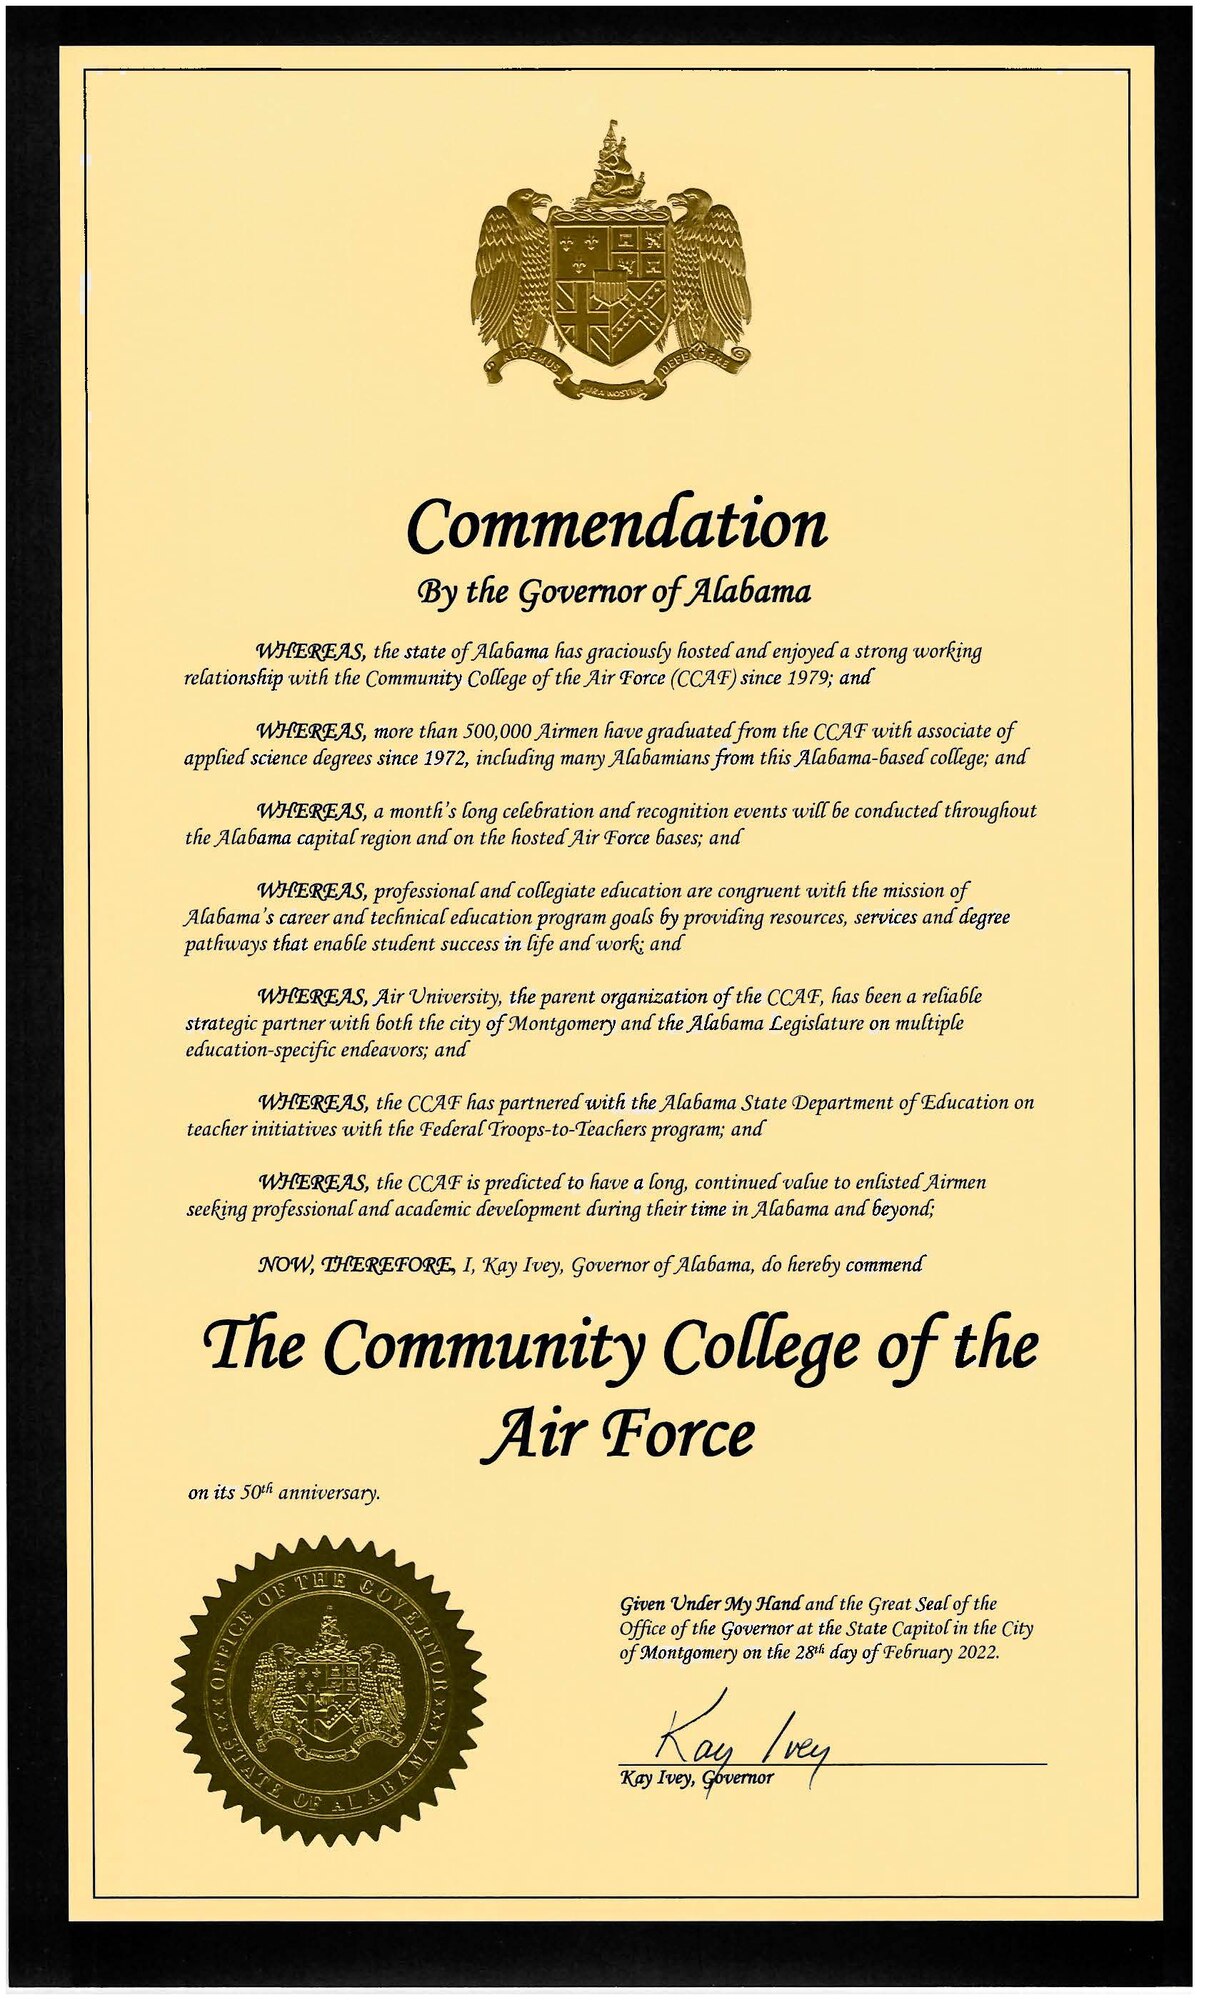 MAXWELL AIR FORCE BASE, Ala. -- The Community College of the Air Force received a signed commendation certificate for their 50th anniversary from the governor of Alabama, Feb. 28, 2022.